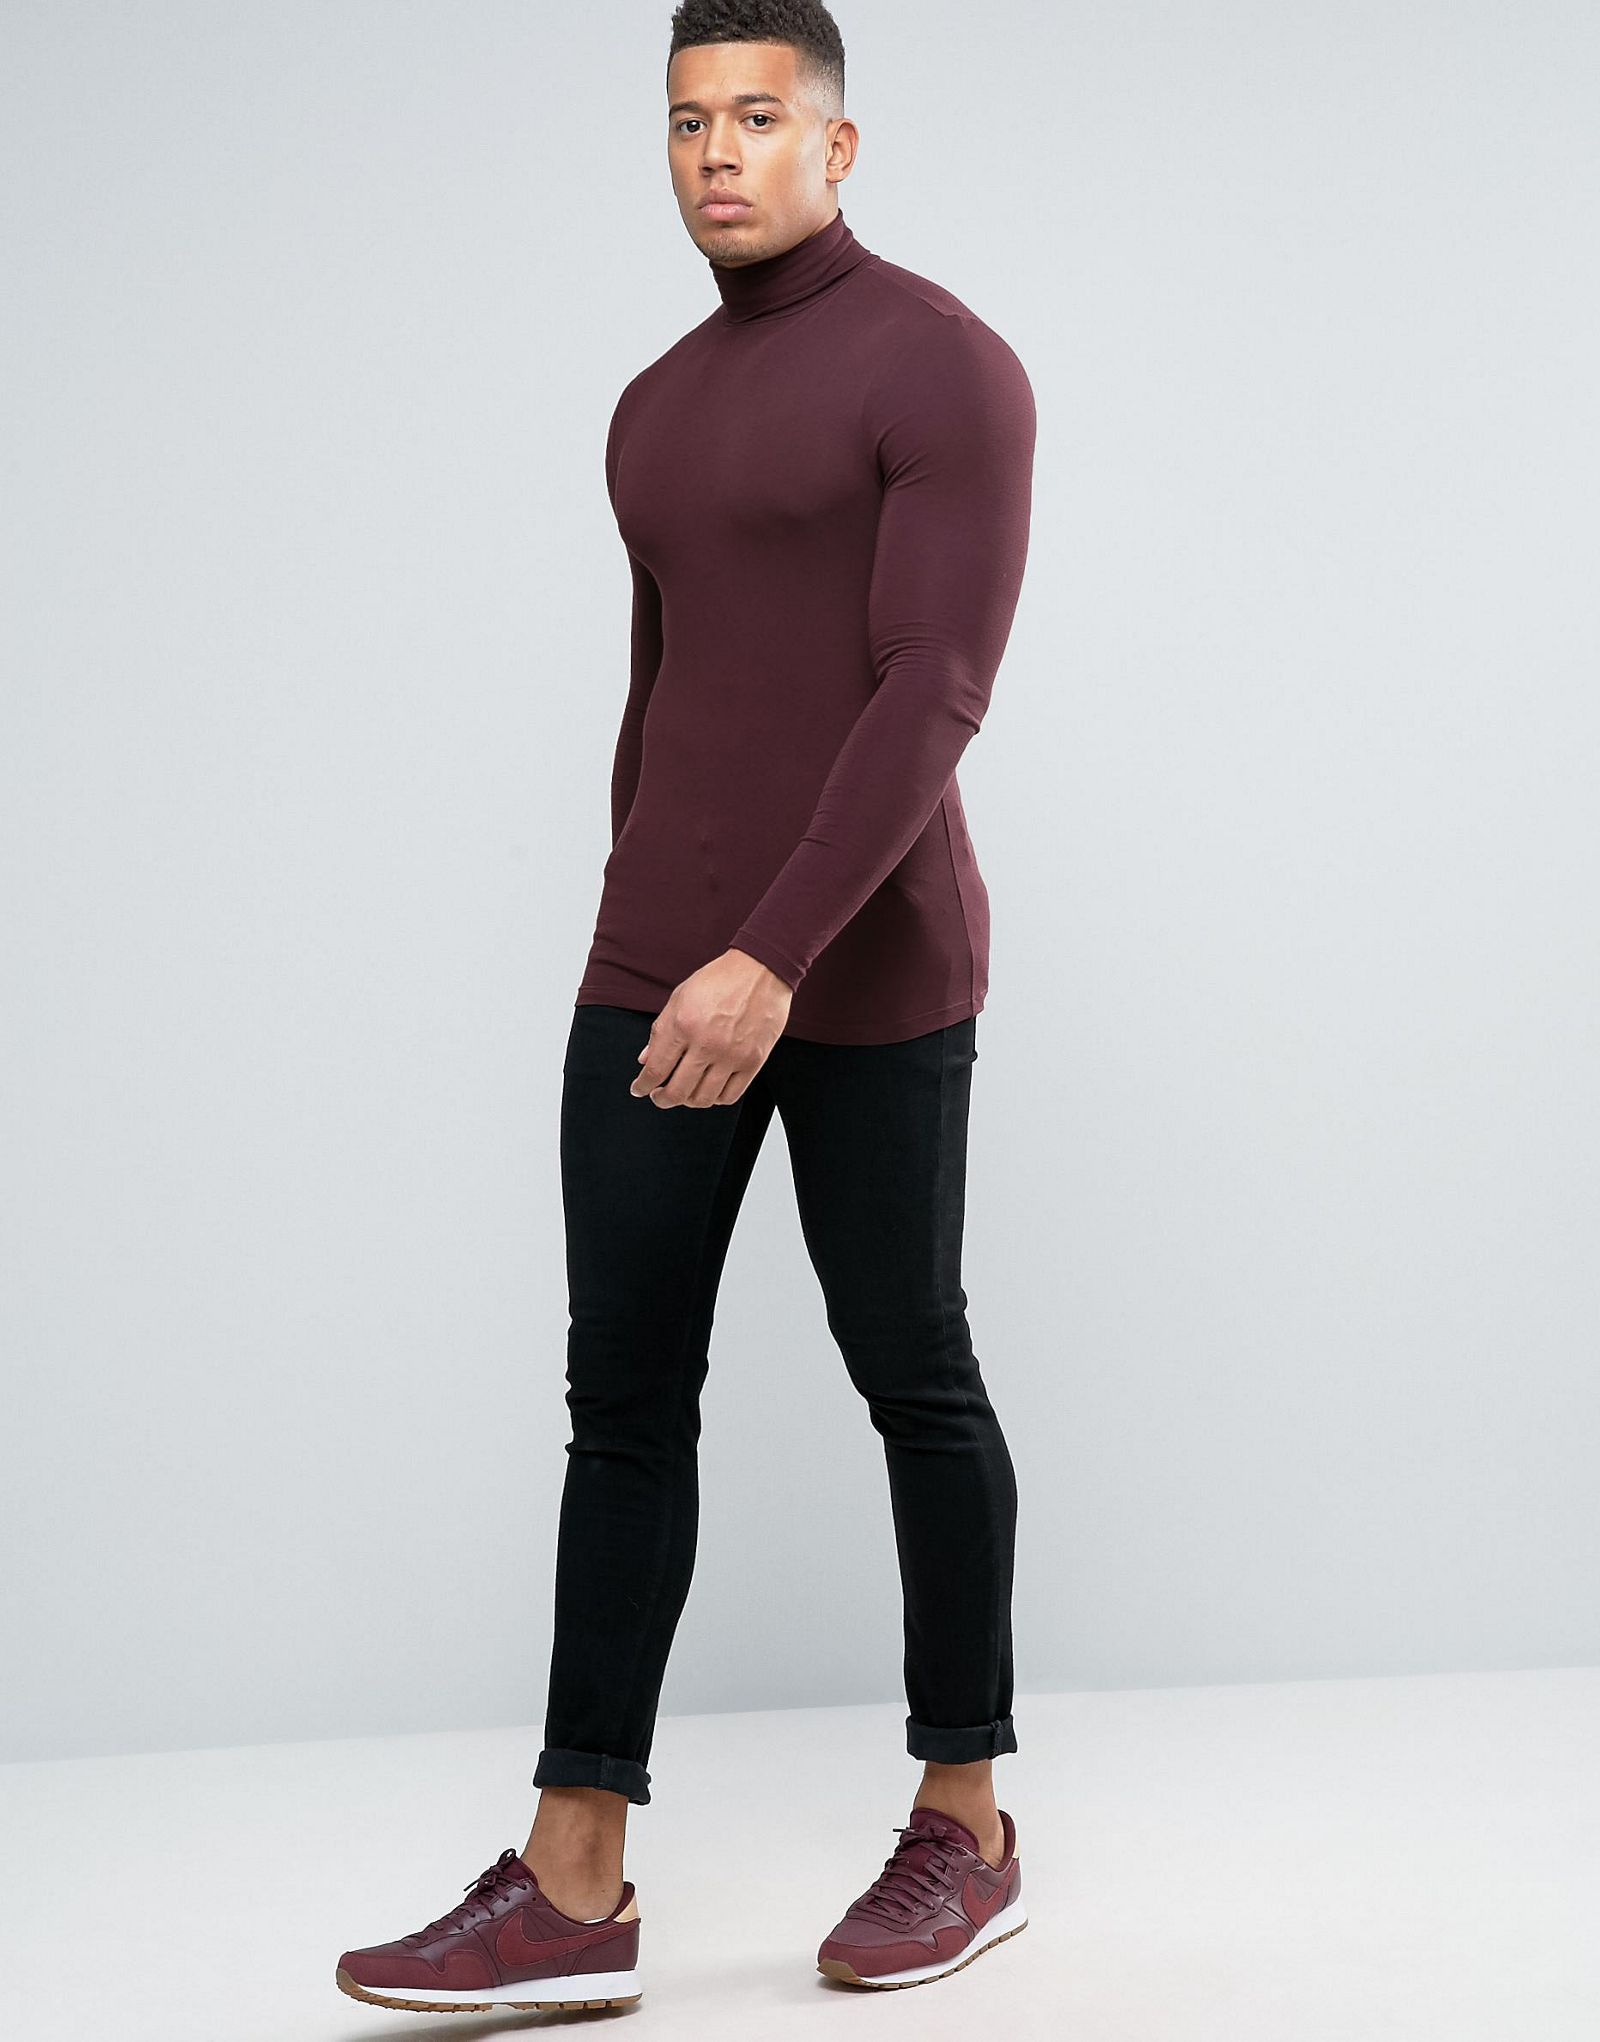 ASOS Extreme Muscle Long Sleeve T-Shirt With Roll Neck 5 Pack Save 20%